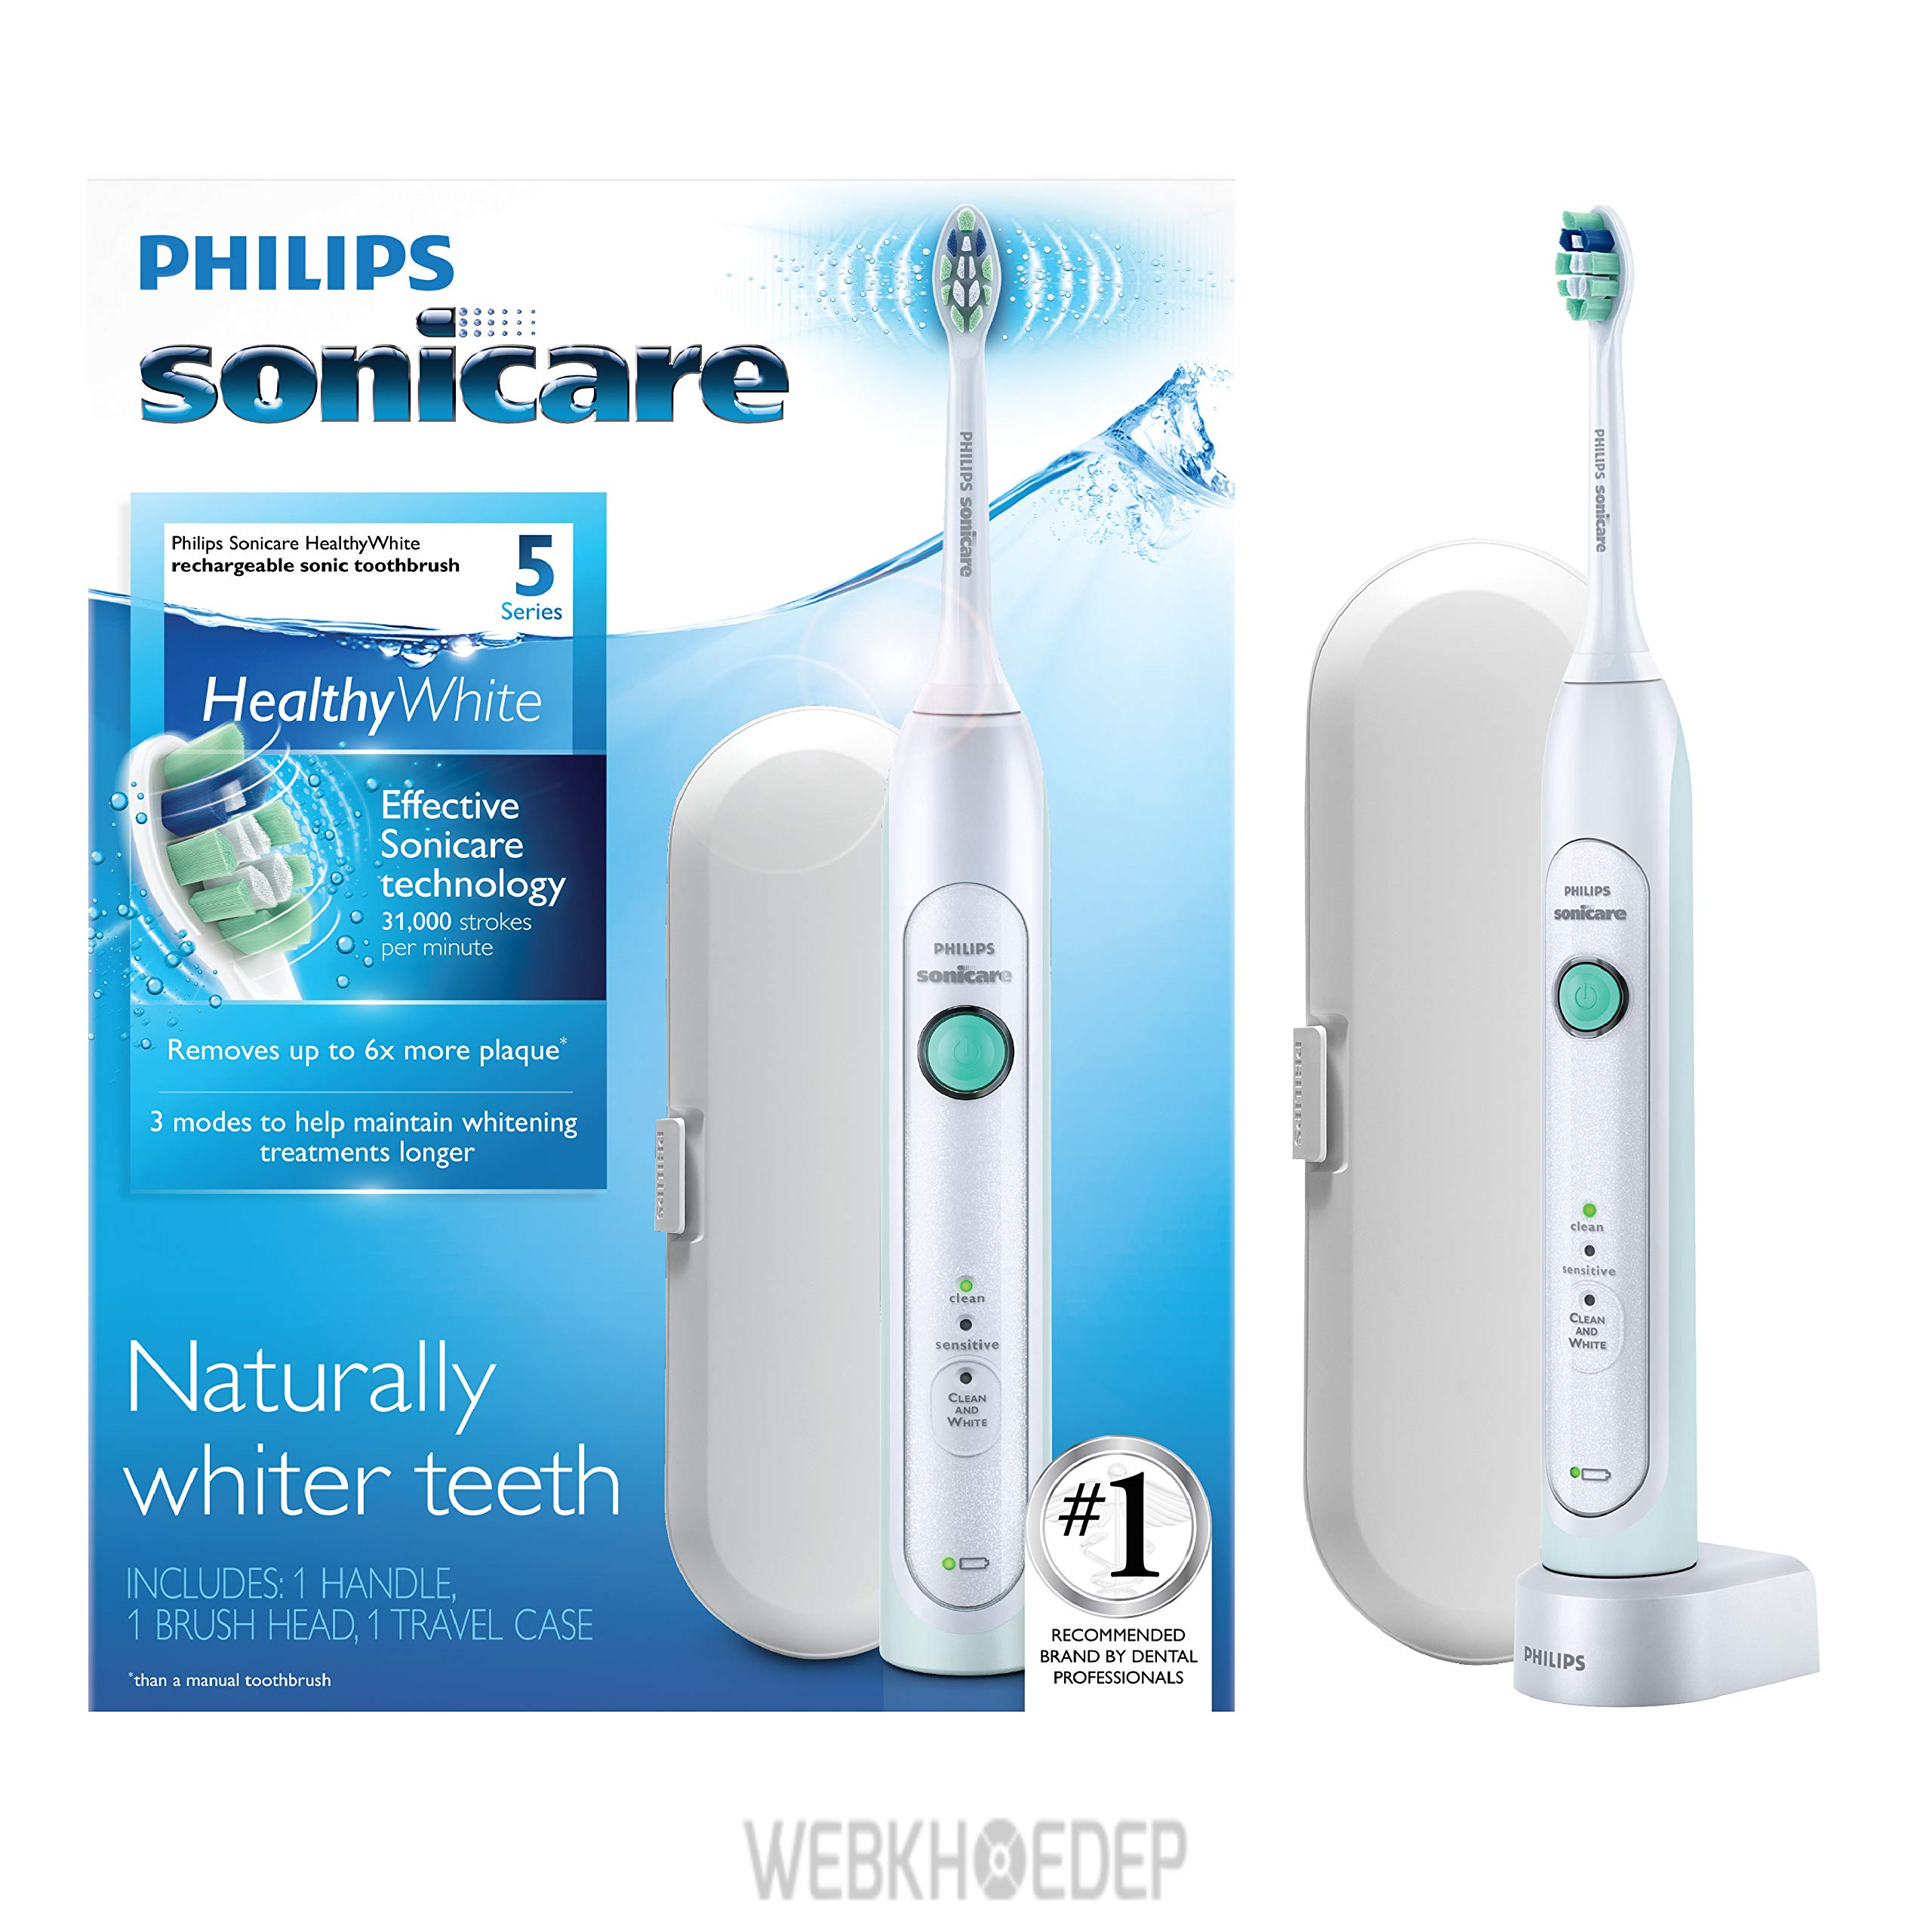 Philips Sonicare 5 Series Healthy White 